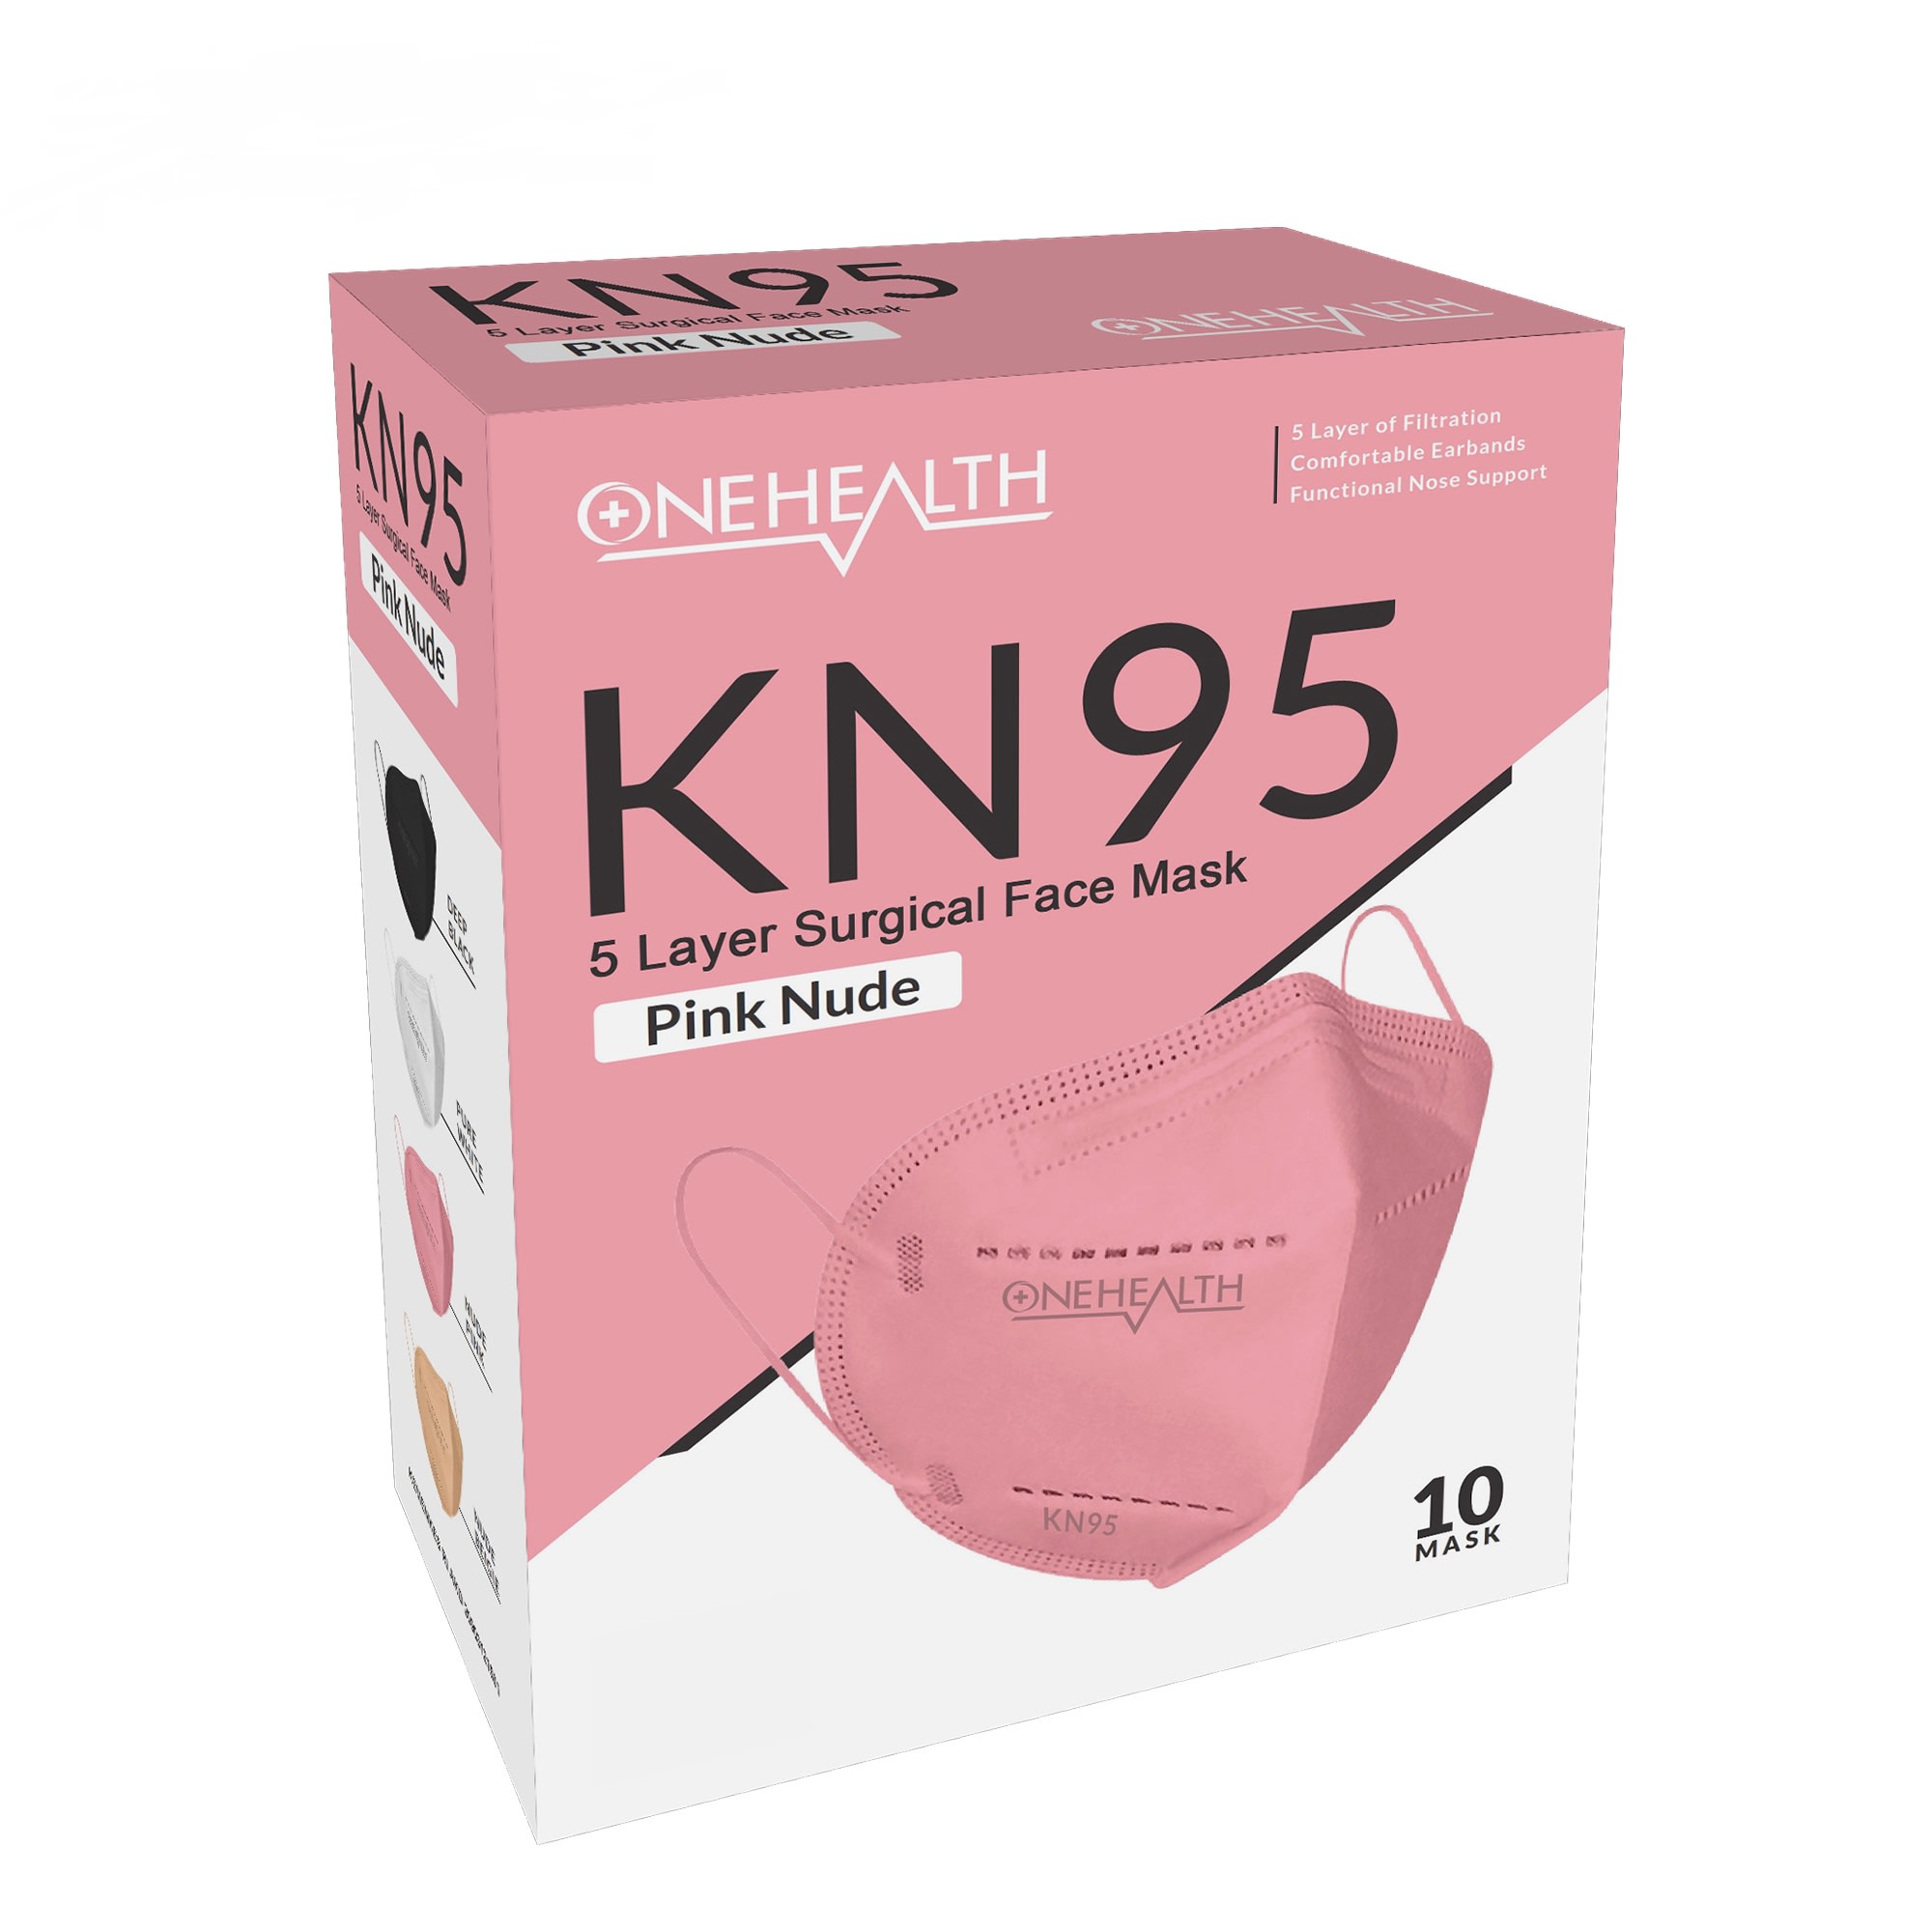 Onehealth KN95 5 Layer Surgical Face Mask